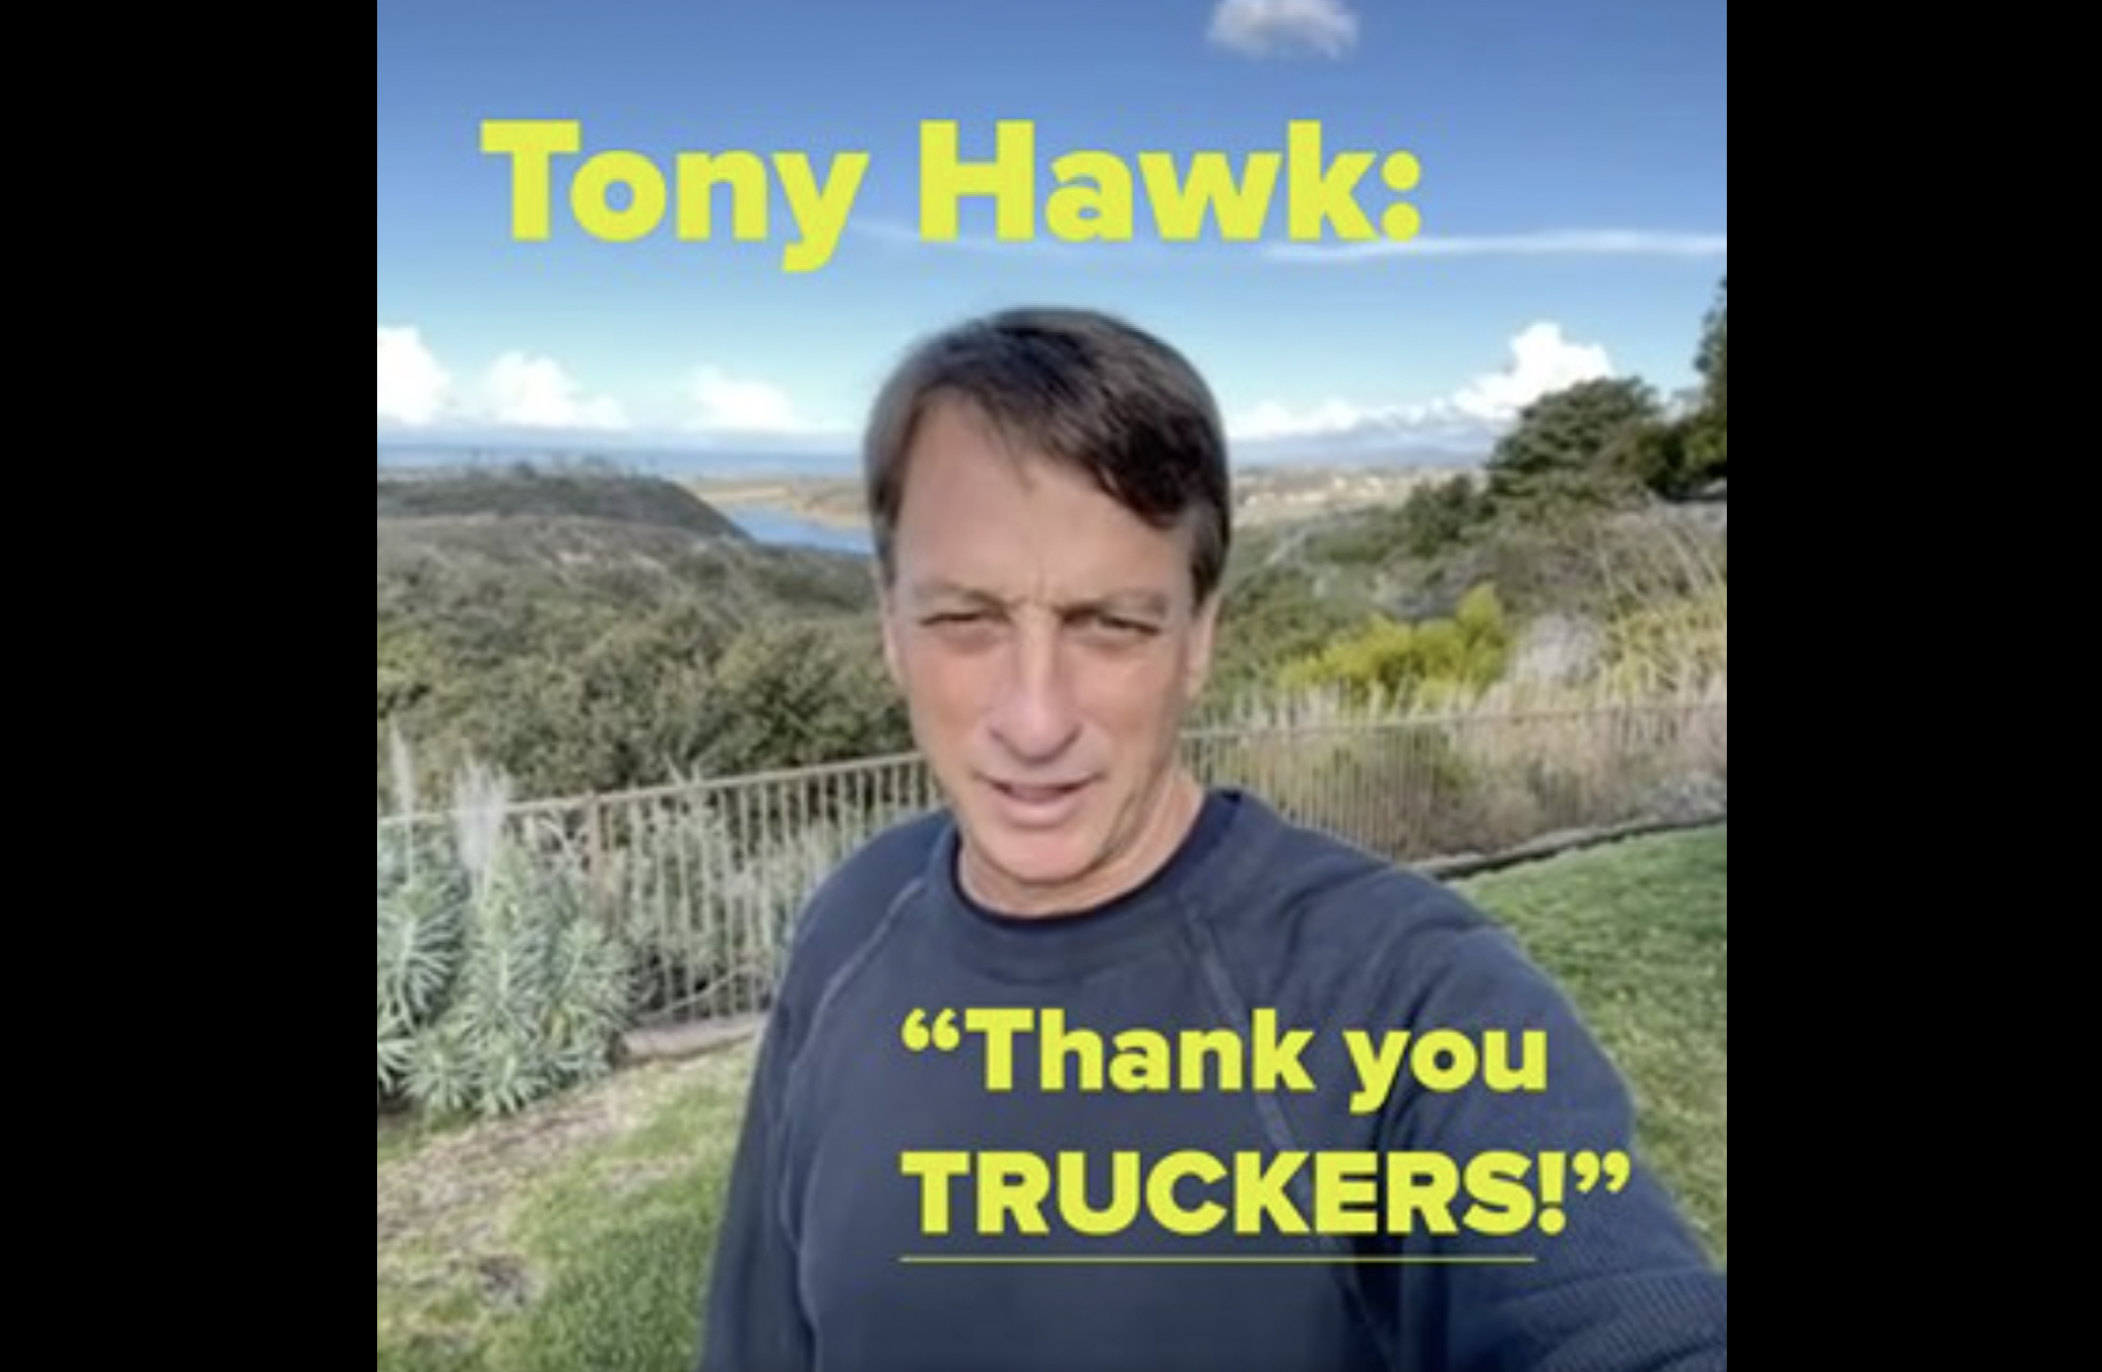 Skateboard superstar Tony Hawk shouts out truckers as the true heroes of the pandemic